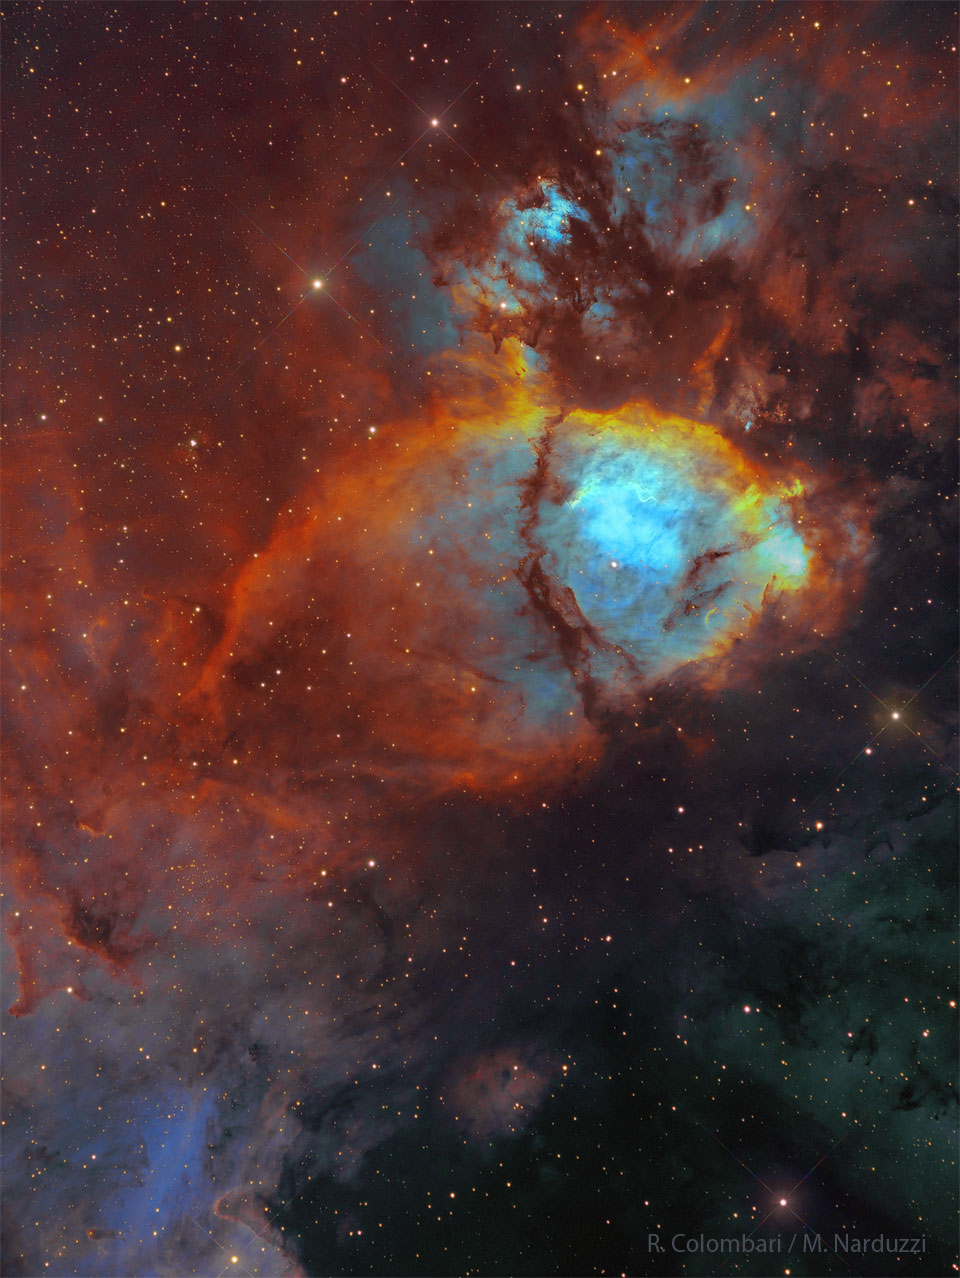 Exemplary sky picture from the apod.pl/apod service: a dusty nebula